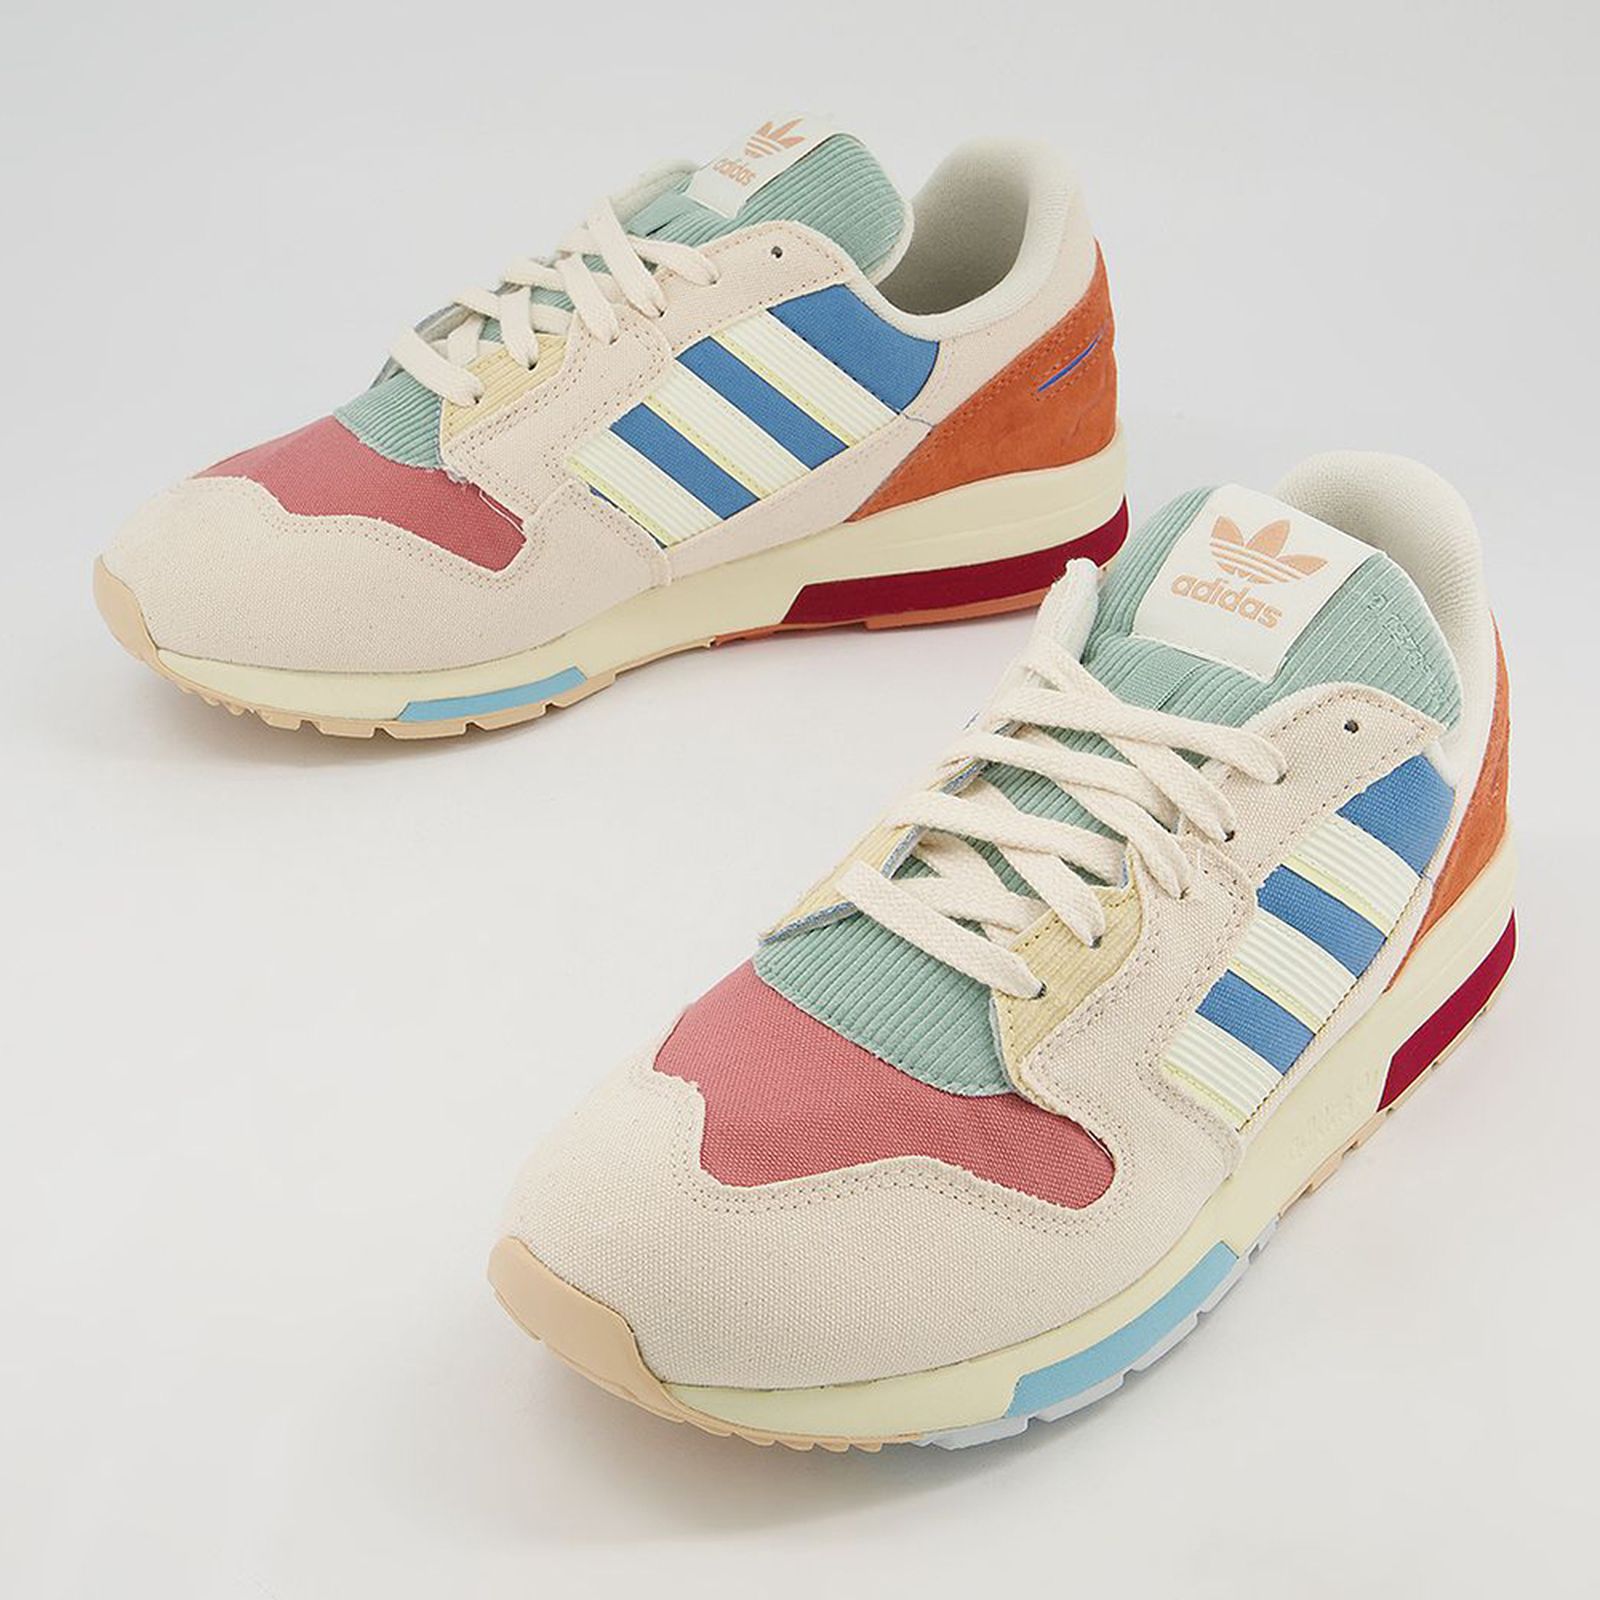 offspring-adidas-zx-420-la-release-date-price-07